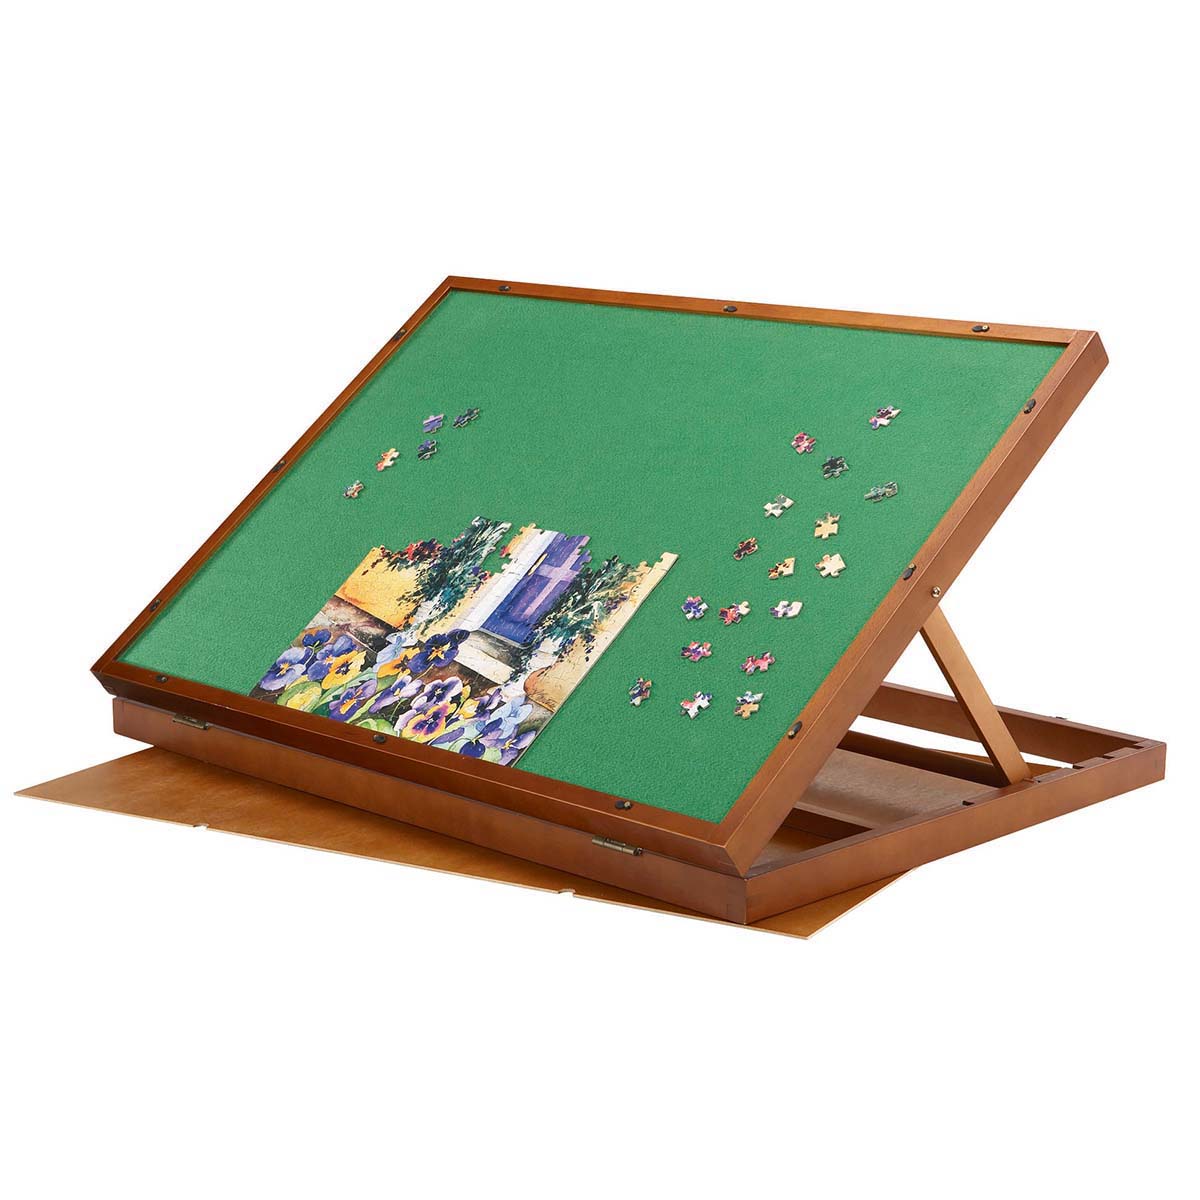 Puzzle Box Stand Puzzle Lid Holder Puzzle Box Holder Puzzle Easel